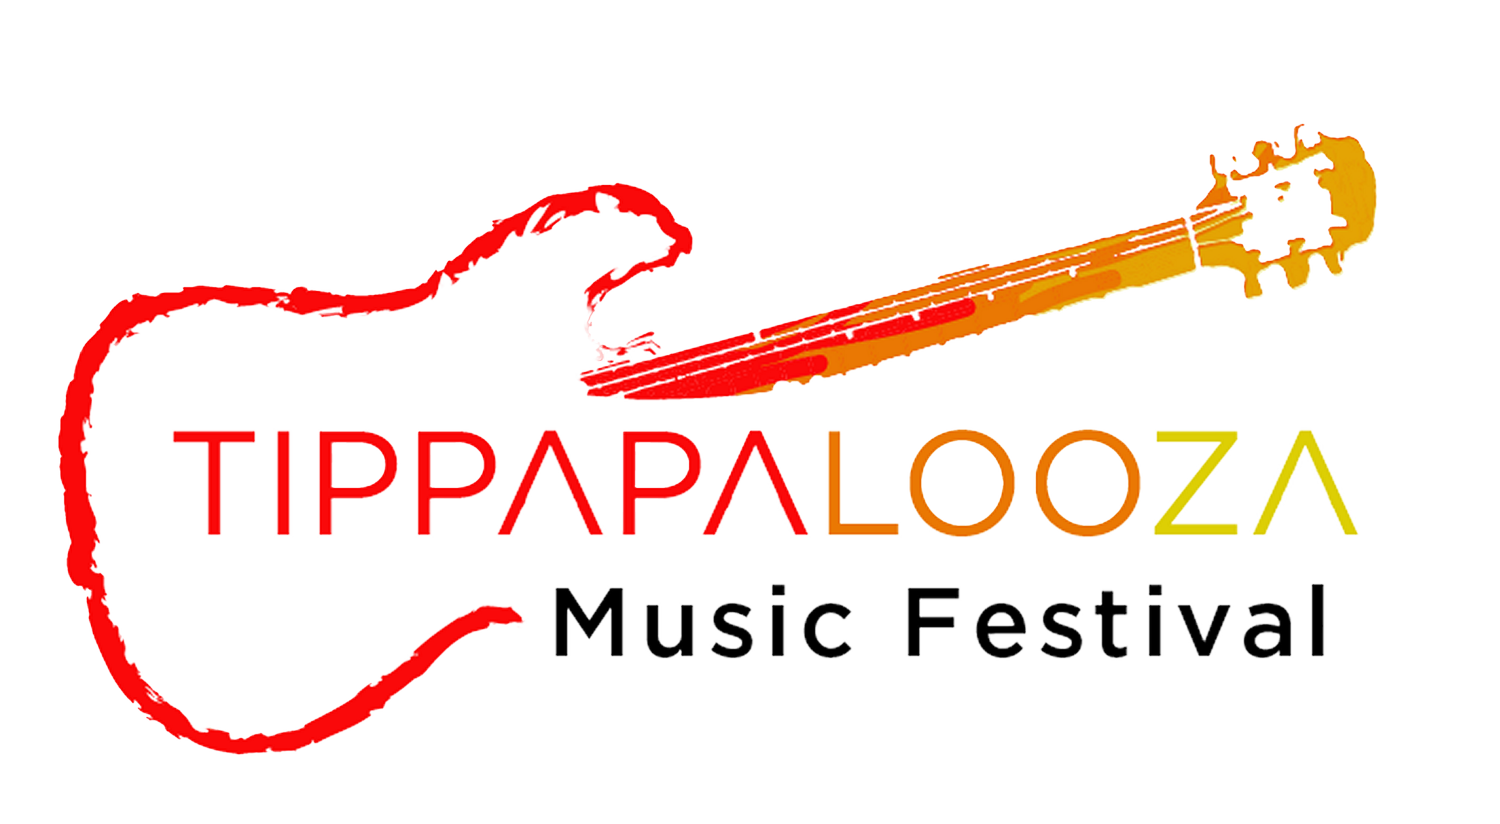 A Music Festival in Downtown Tipp City, Ohio